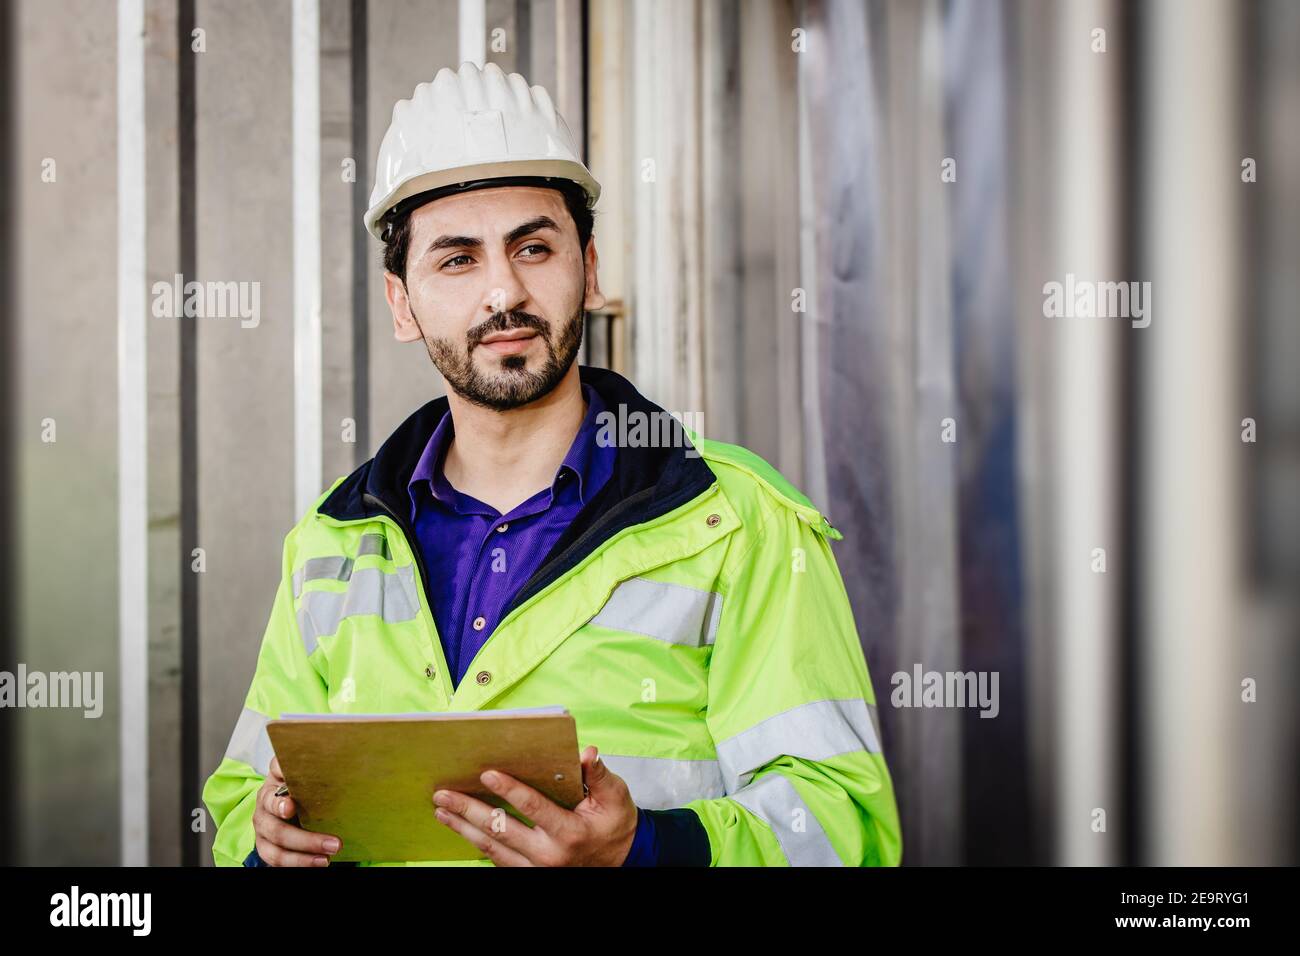 Handsome Latin Indian race worker working in industrial factory load warehouse hand holding check list looking smart Stock Photo